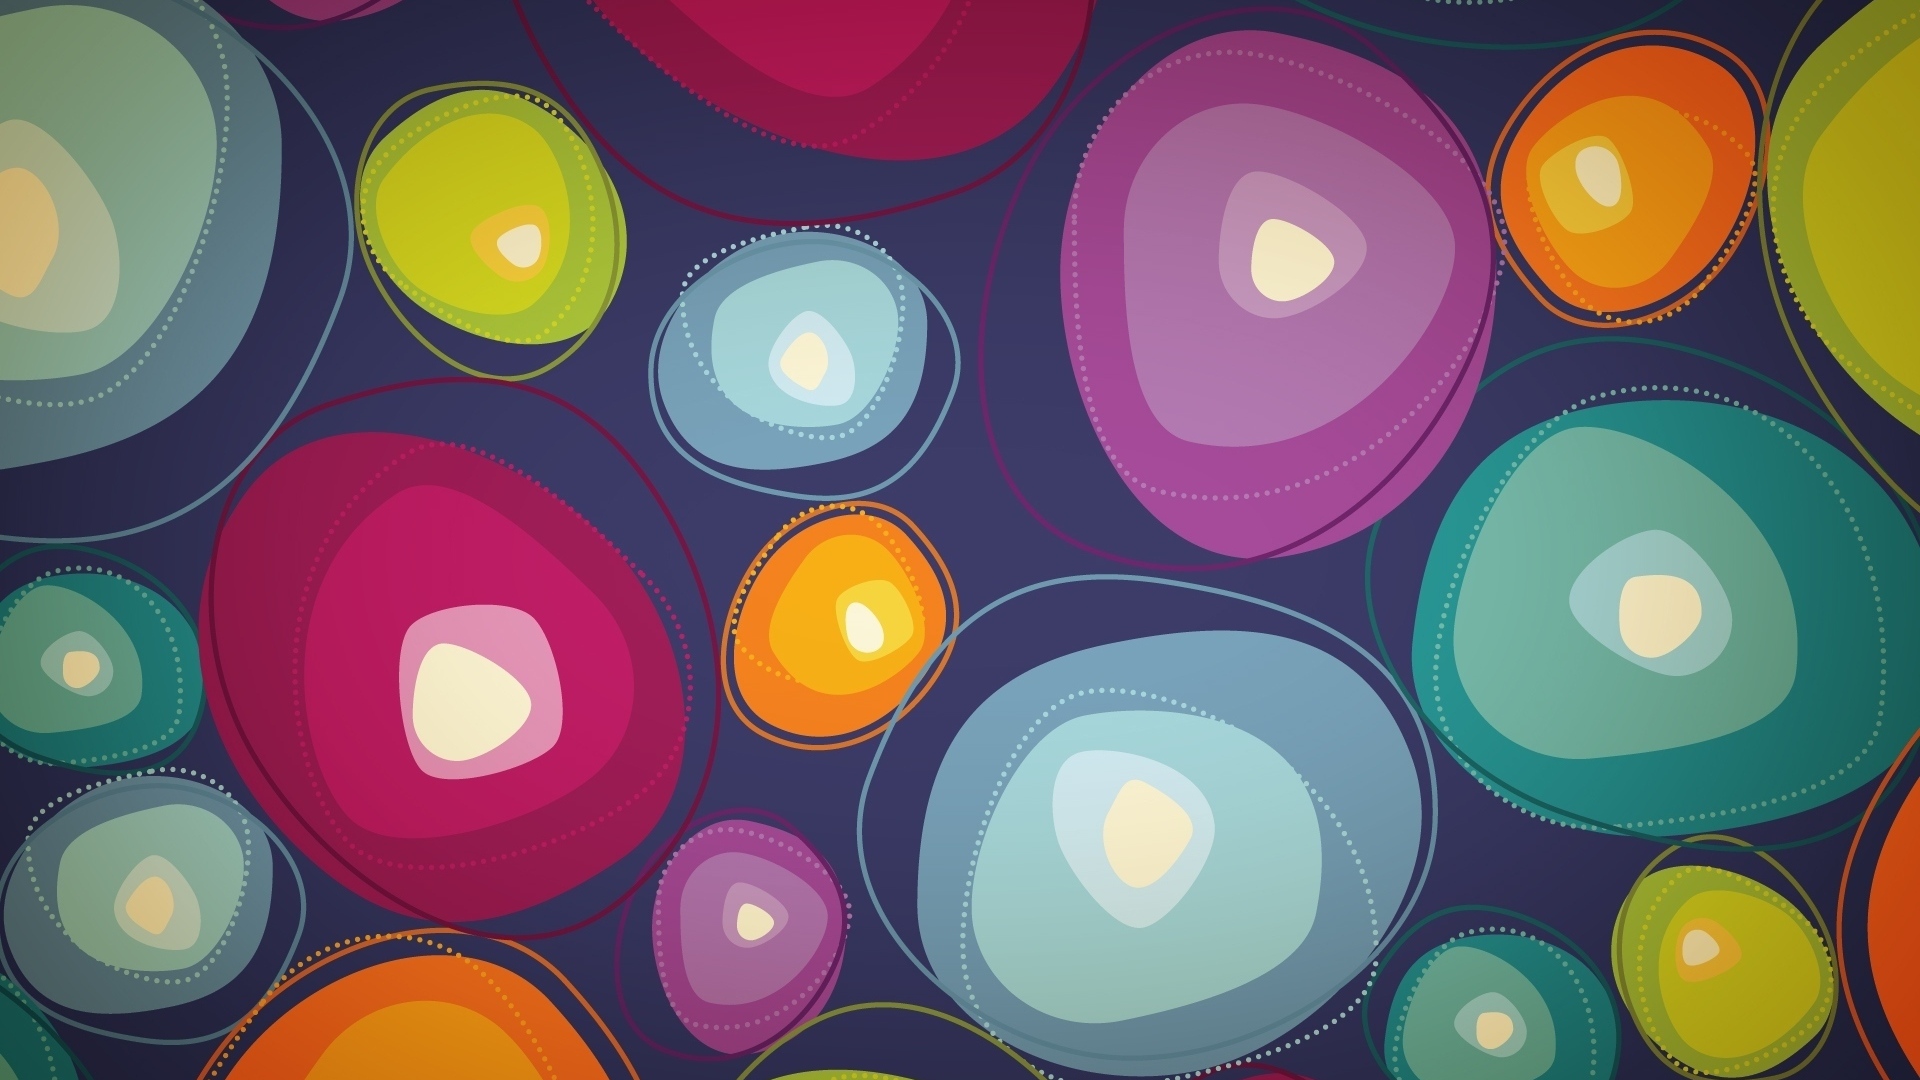 Download Wallpaper 1920x1080 circles, background, colorful, texture ...